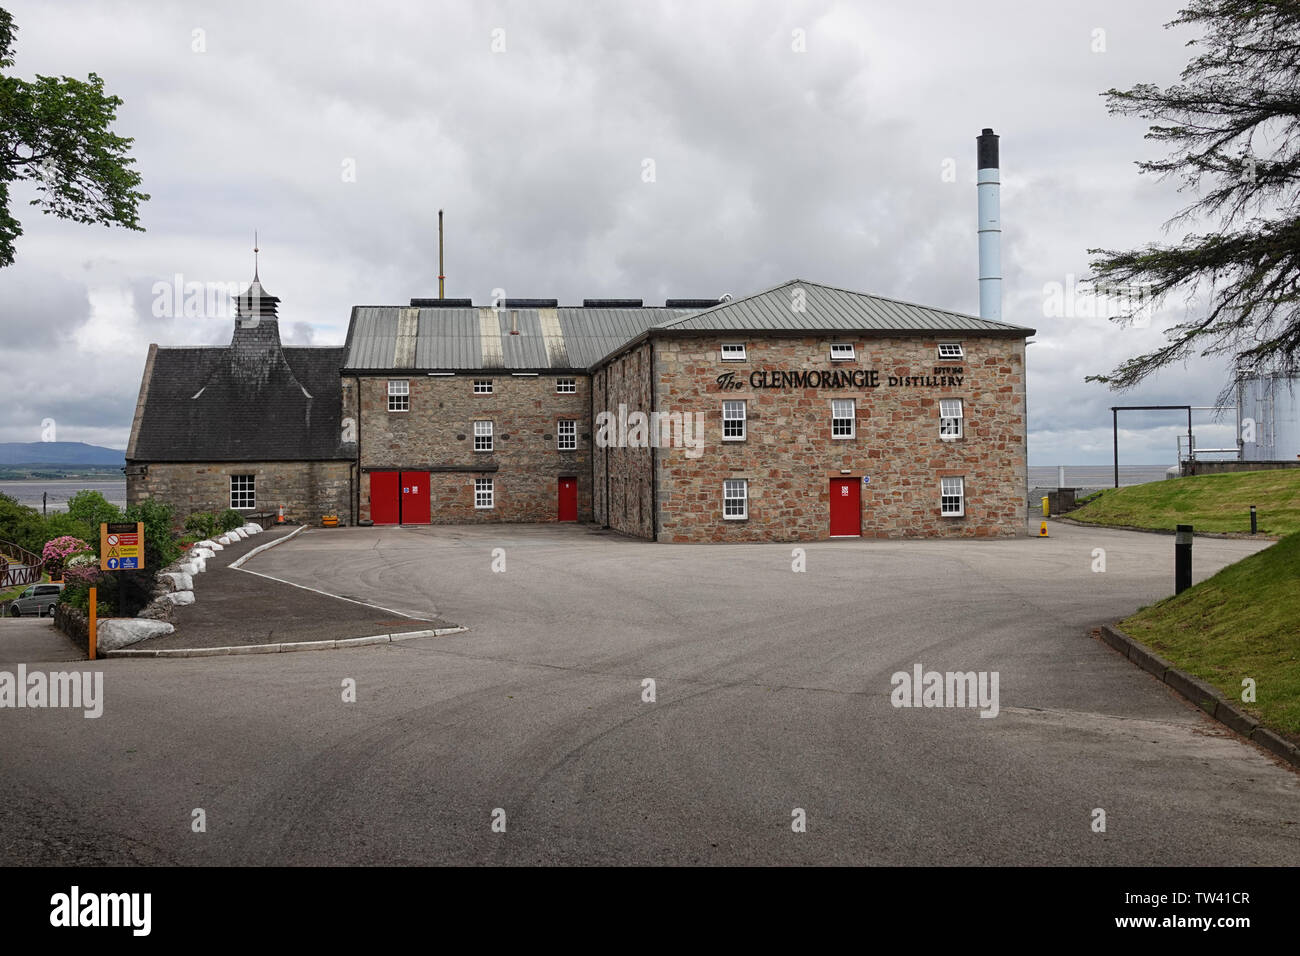 Tain, Scotland - June 11, 2019: The front exterior of Glenmorangie Distillery, founded in 1843 and located in the Scottish Highlands, is shown. Stock Photo